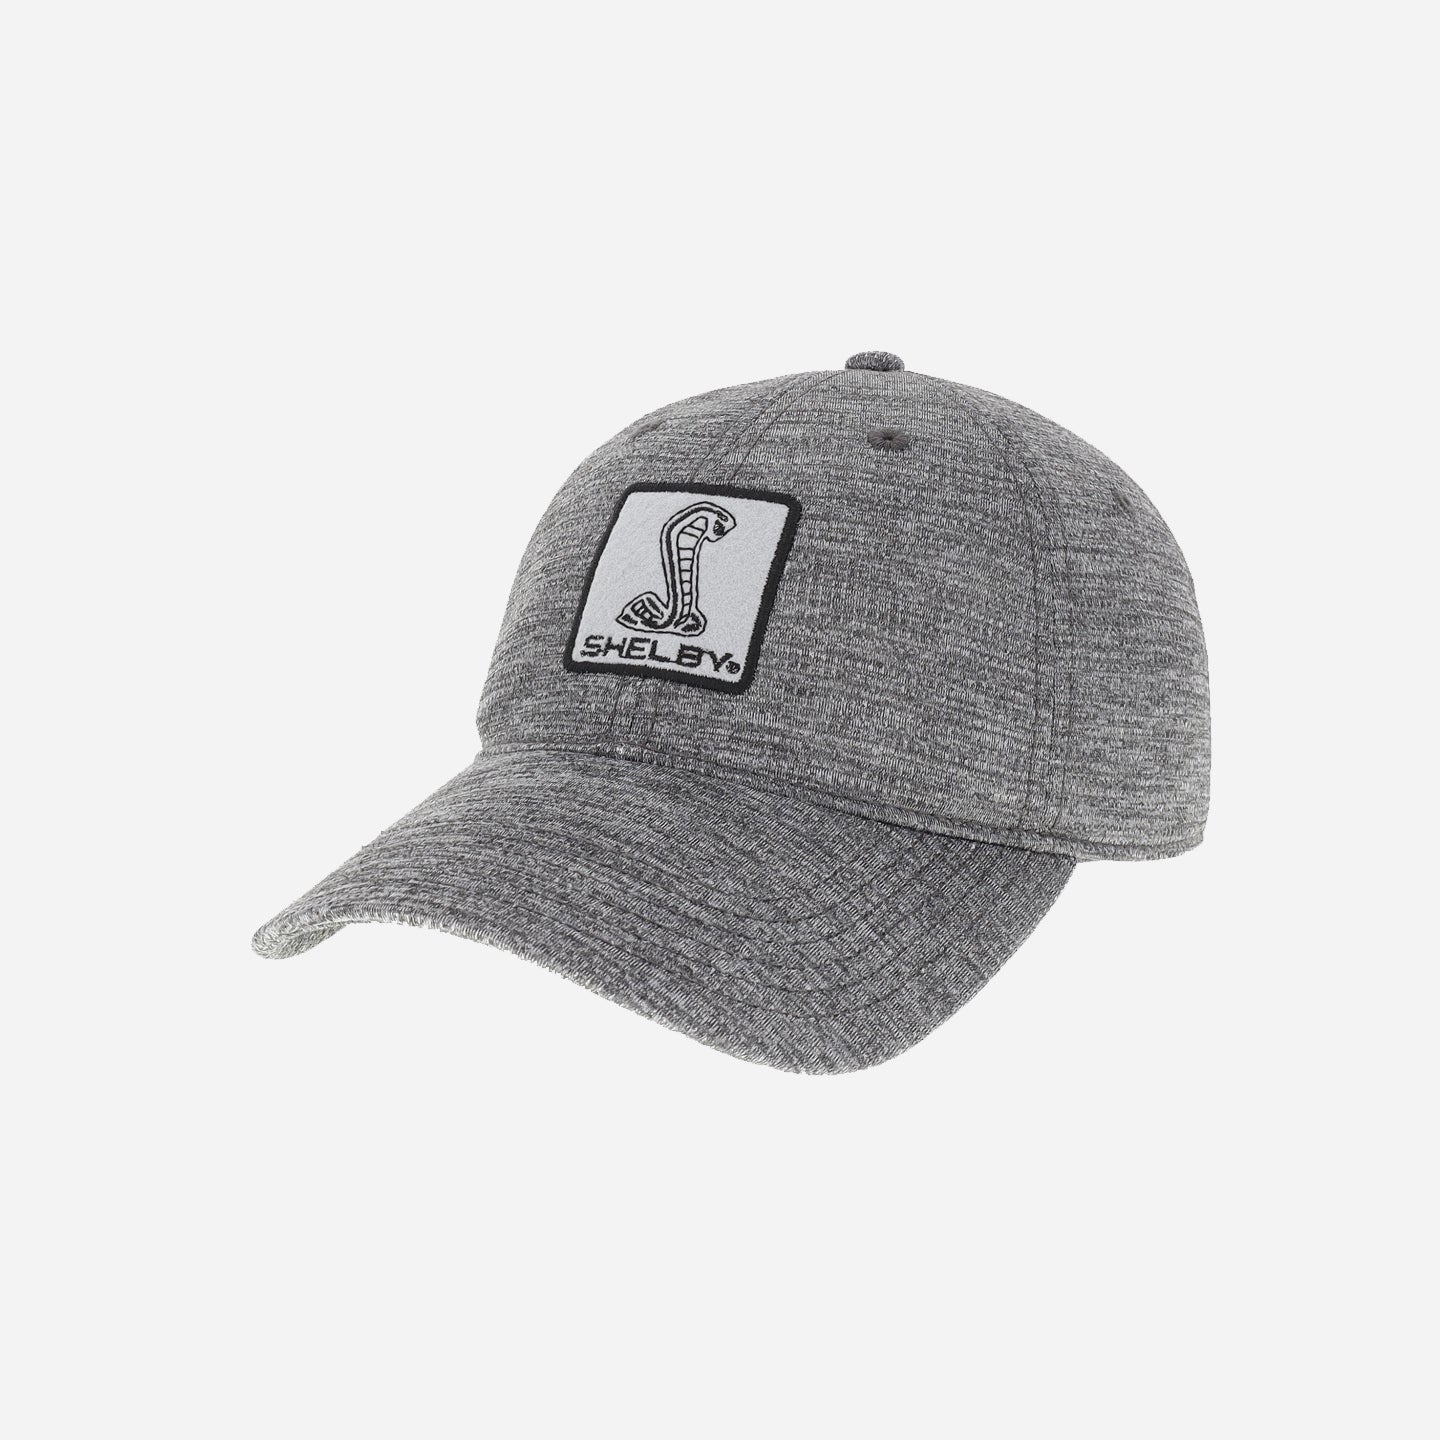 Shelby Embroidered Adjustable Cool Fit Hat - Gray